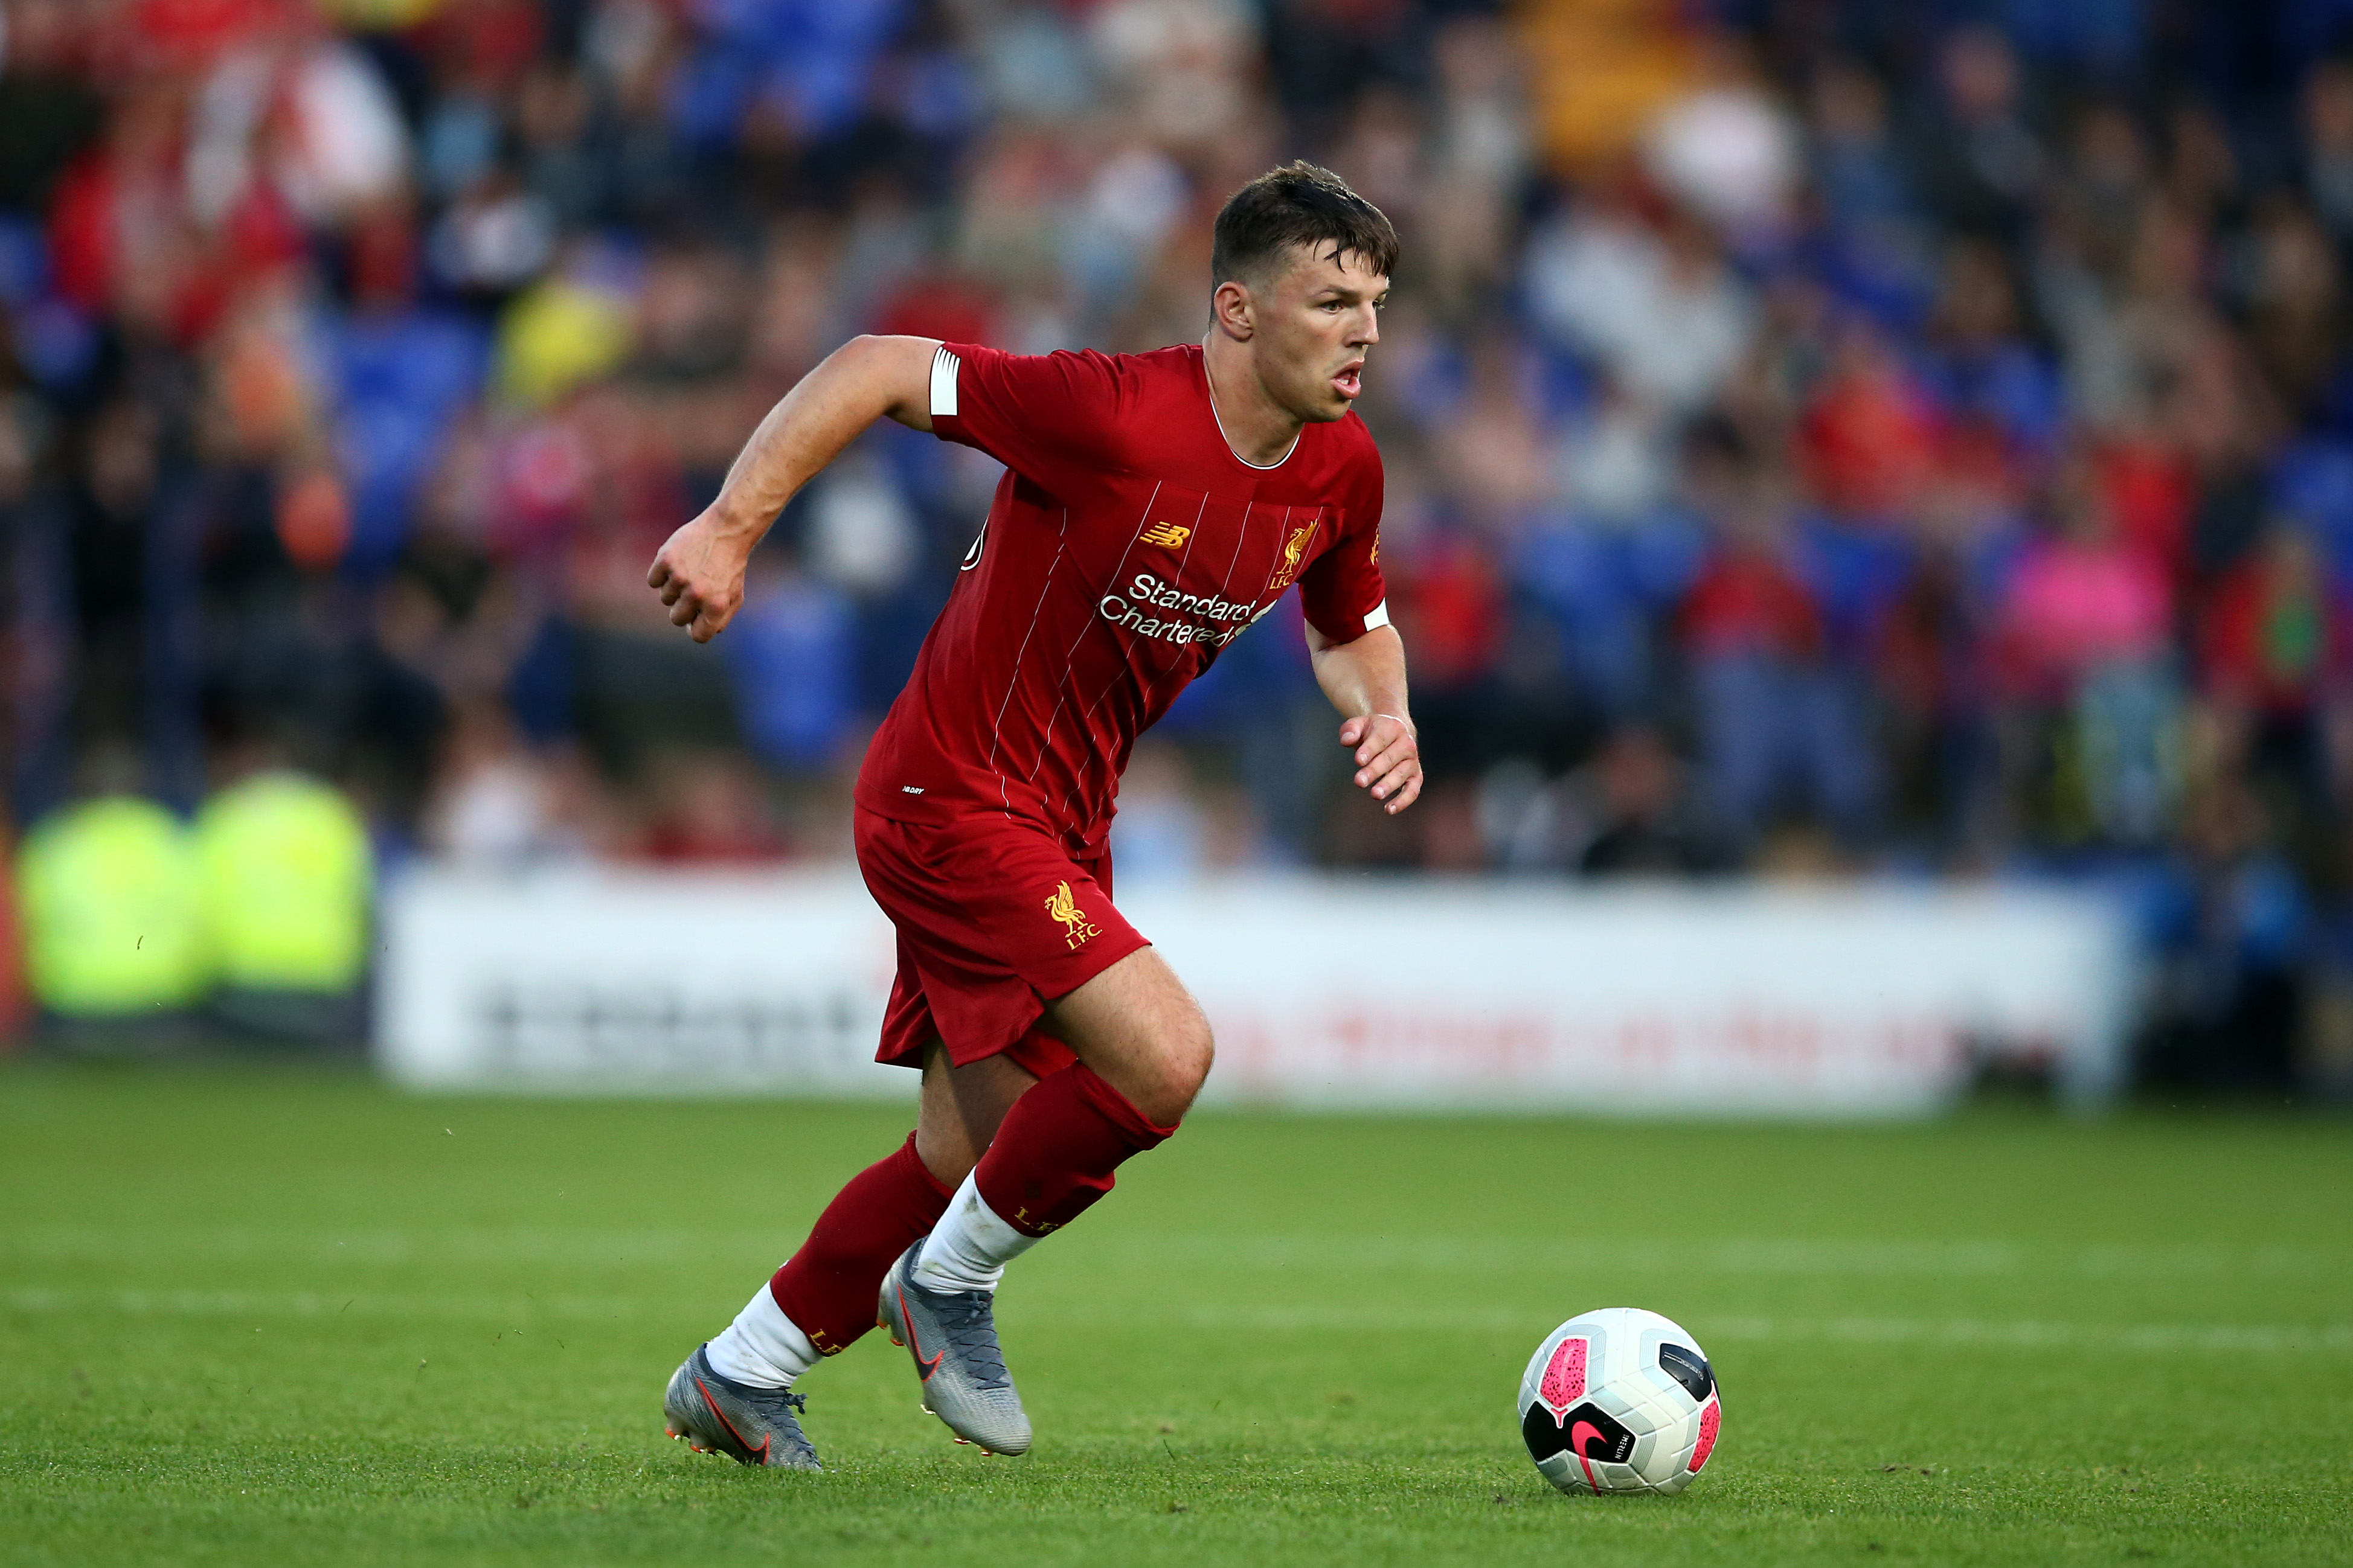 BIRKENHEAD, ENGLAND - JULY 11:  Bobby Duncan of Liverpool during the Pre-Season Friendly match between Tranmere Rovers and Liverpool at Prenton Park on July 11, 2019 in Birkenhead, England. (Photo by Jan Kruger/Getty Images)